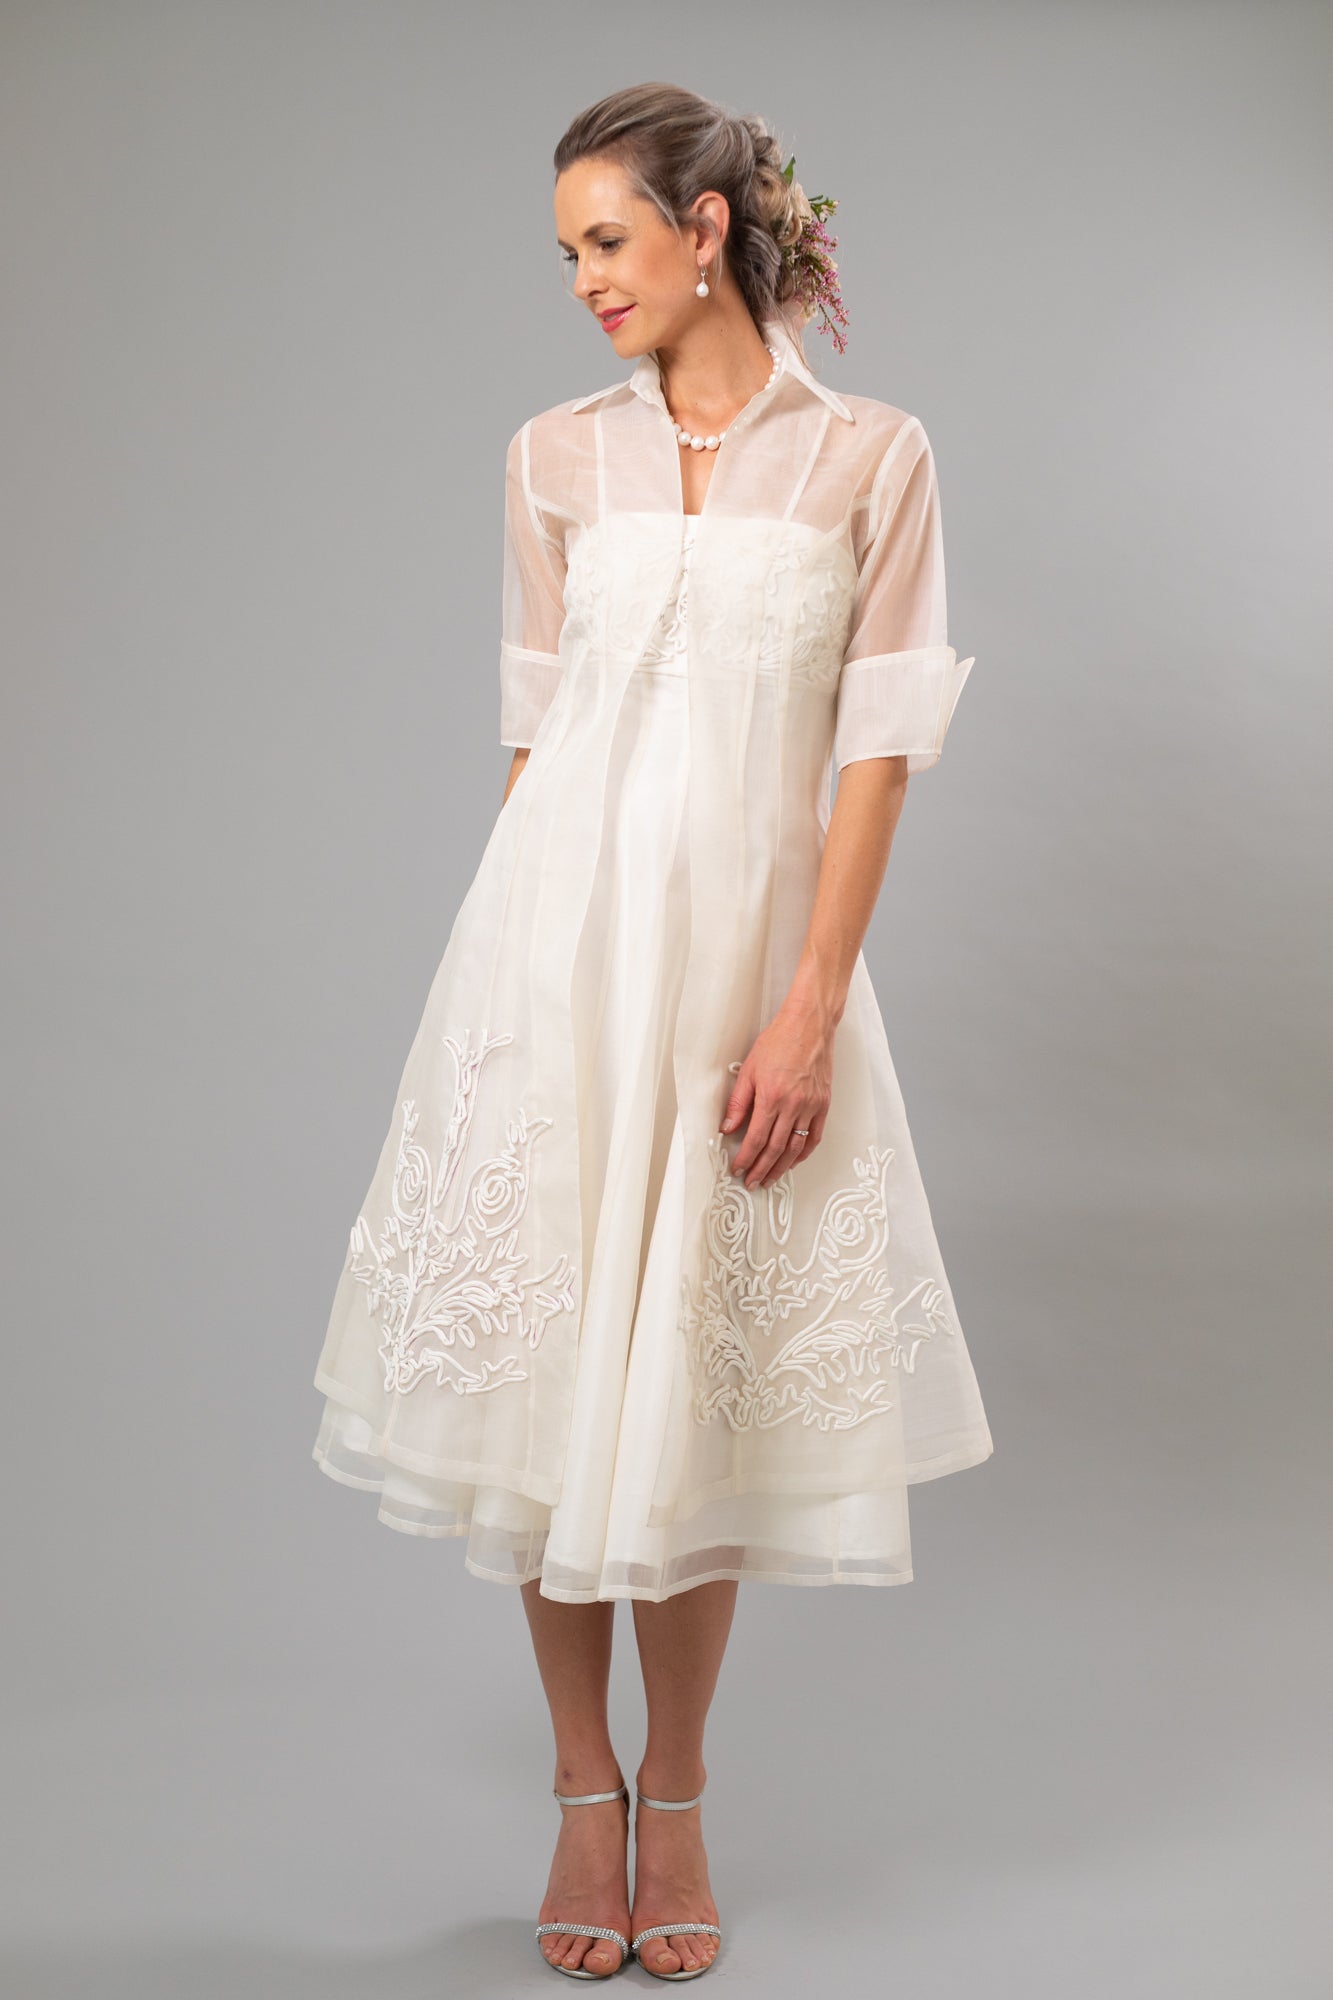 Living Silk - Jasmine Lace Organza Coat - For the Understated Bride